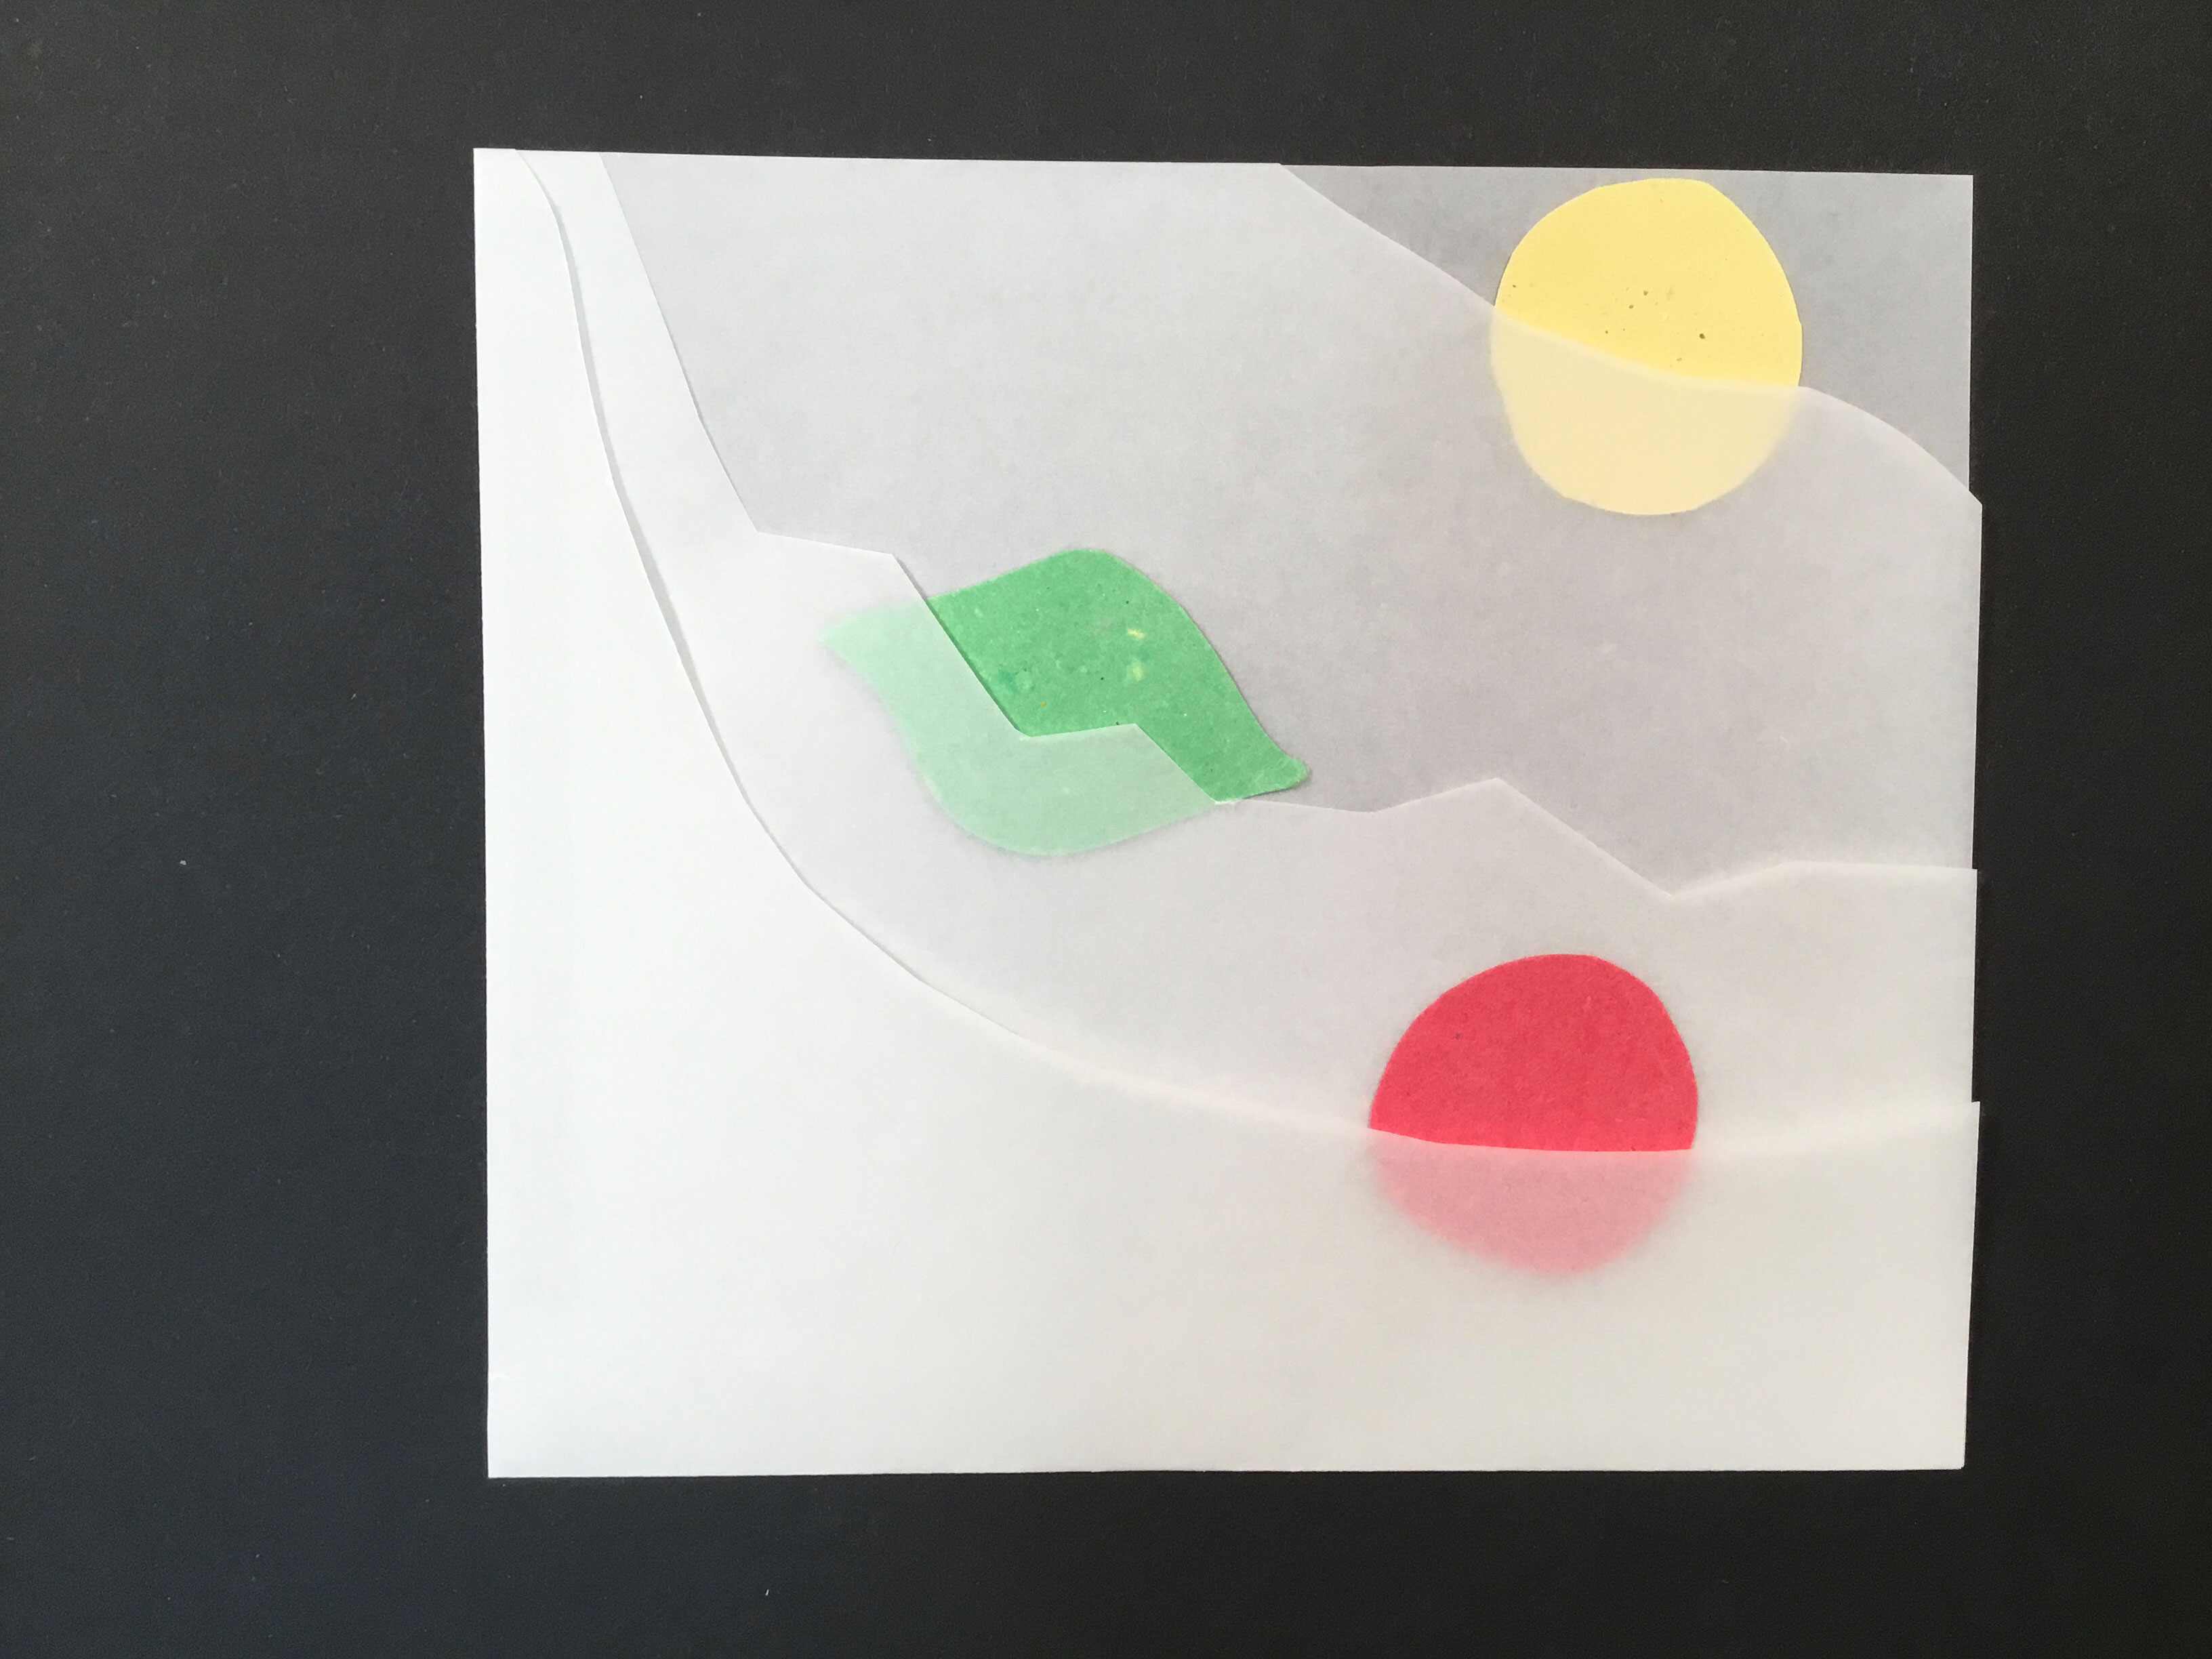 4 layers of translucent paper, each with the top right angle cut out in varying patterns. In the top right corner, between the base and second layer, is a yellow paper circle. In the center left, between the second and third layers, is a green paper lime. In the bottom right corner, between the third and fourth layers, is a red paper circle.